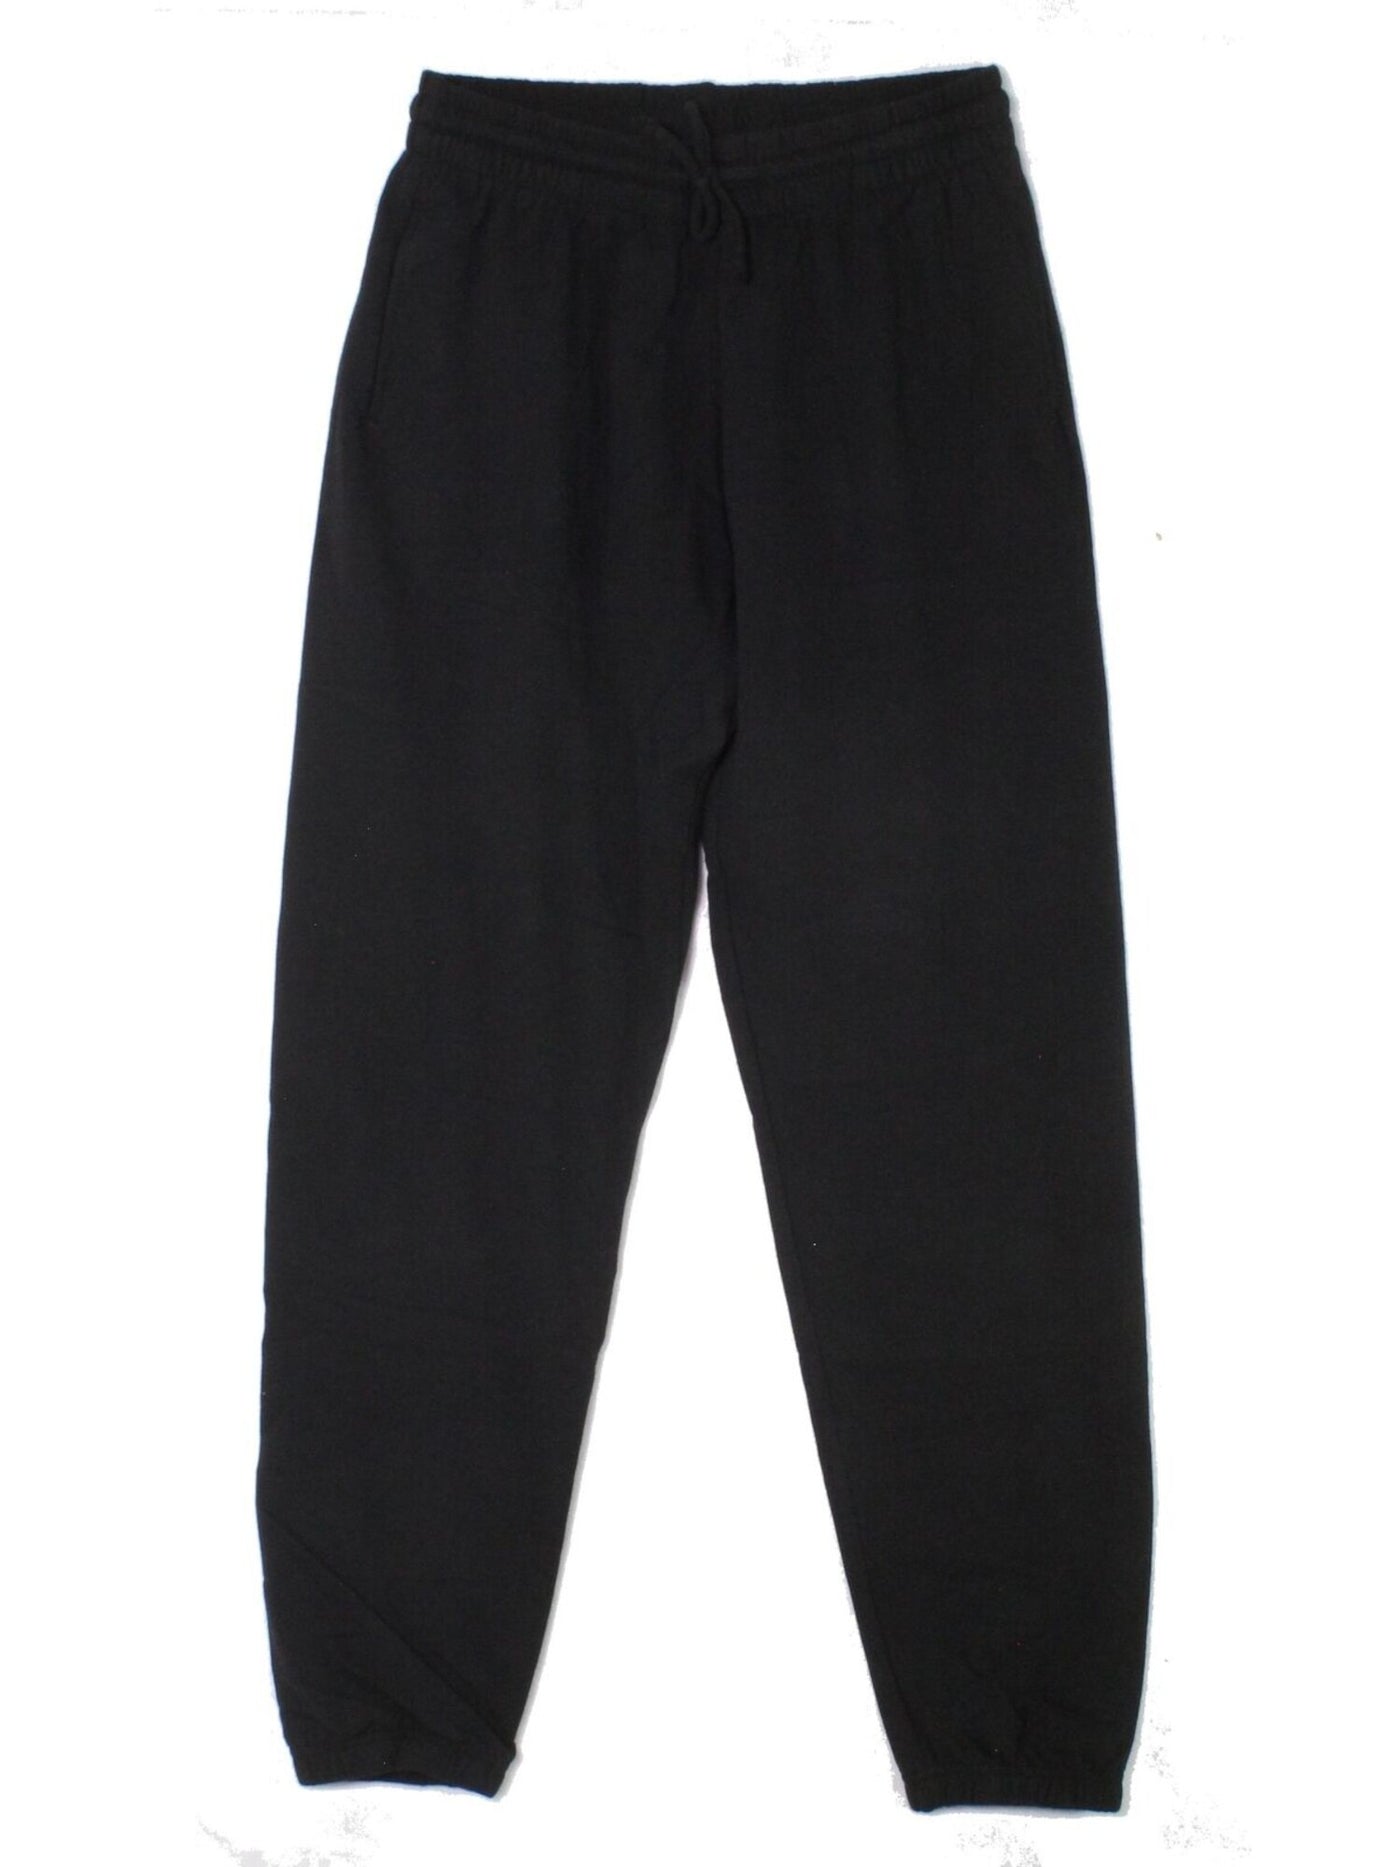 BAM BY BETSY & ADAM Womens Black Pocketed Drawstring Tapered-leg Sweatpant Lounge Pants S